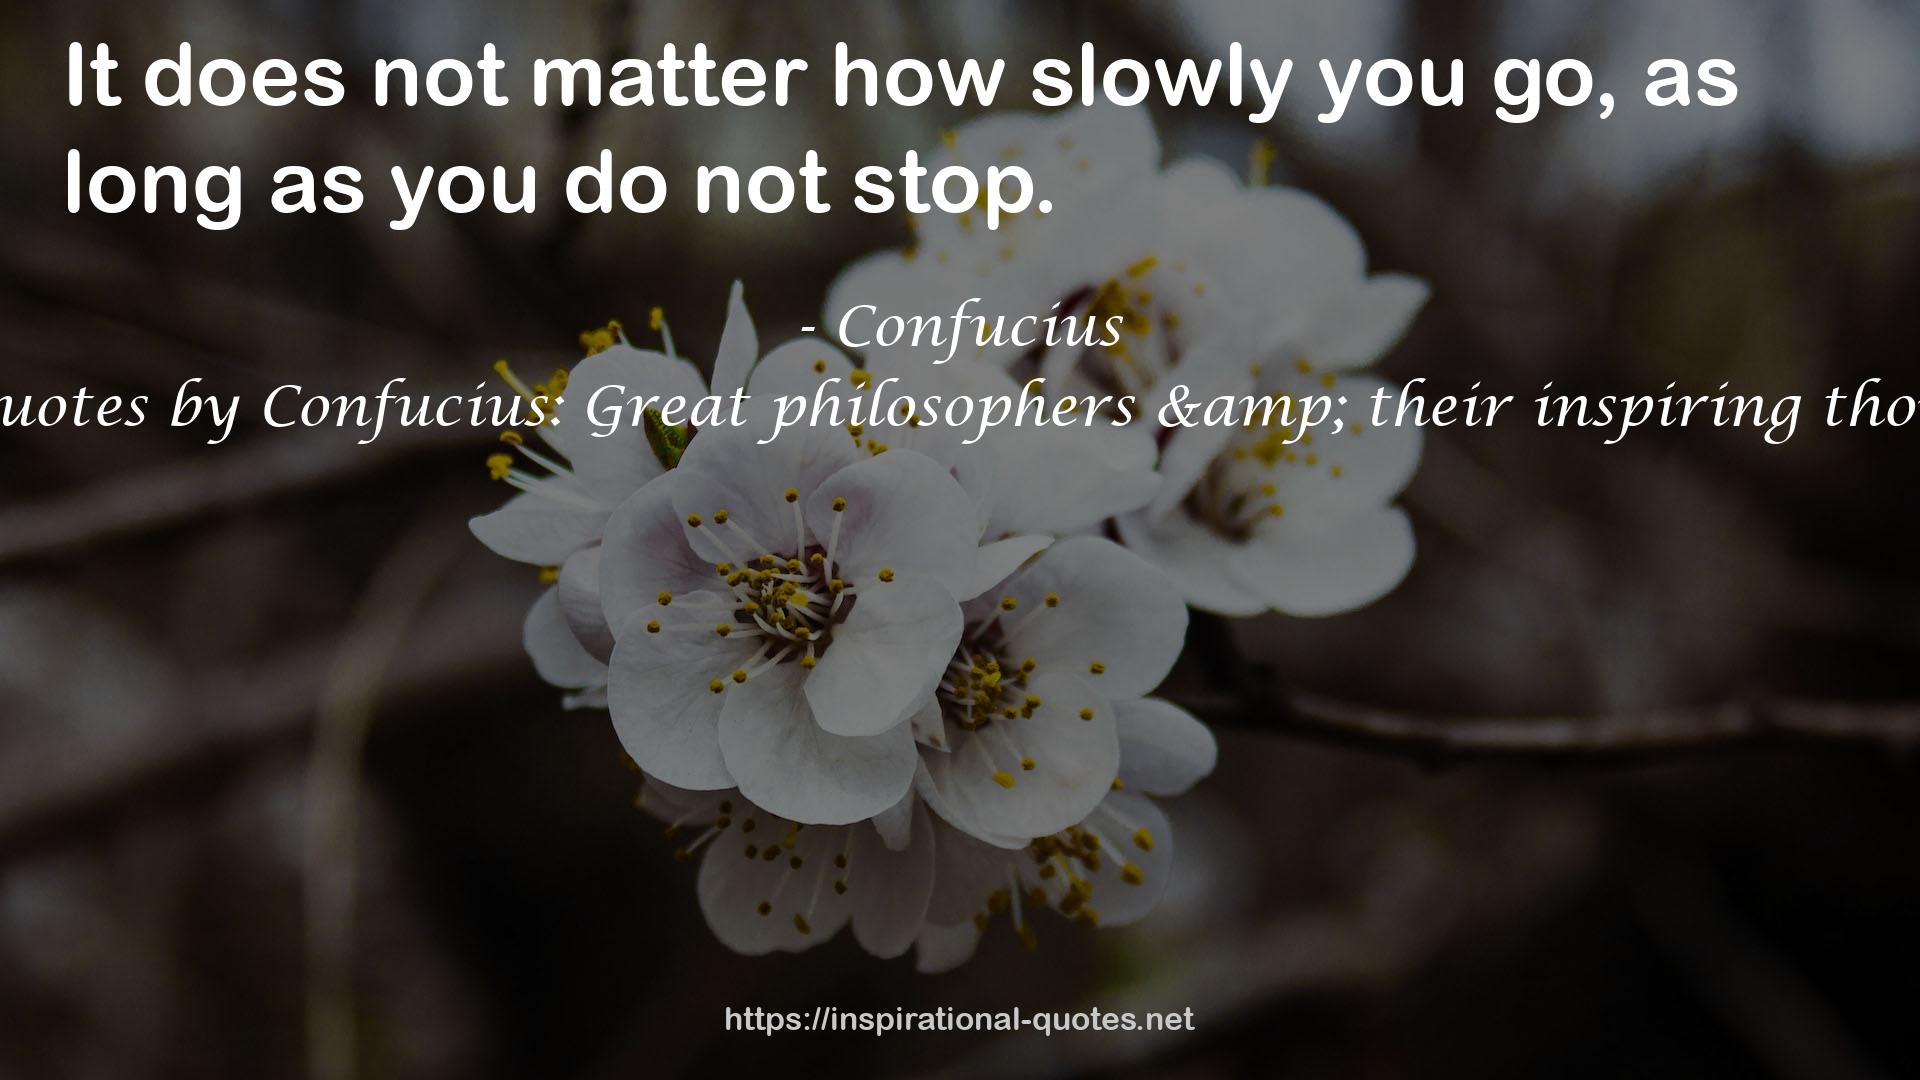 100 quotes by Confucius: Great philosophers & their inspiring thoughts QUOTES